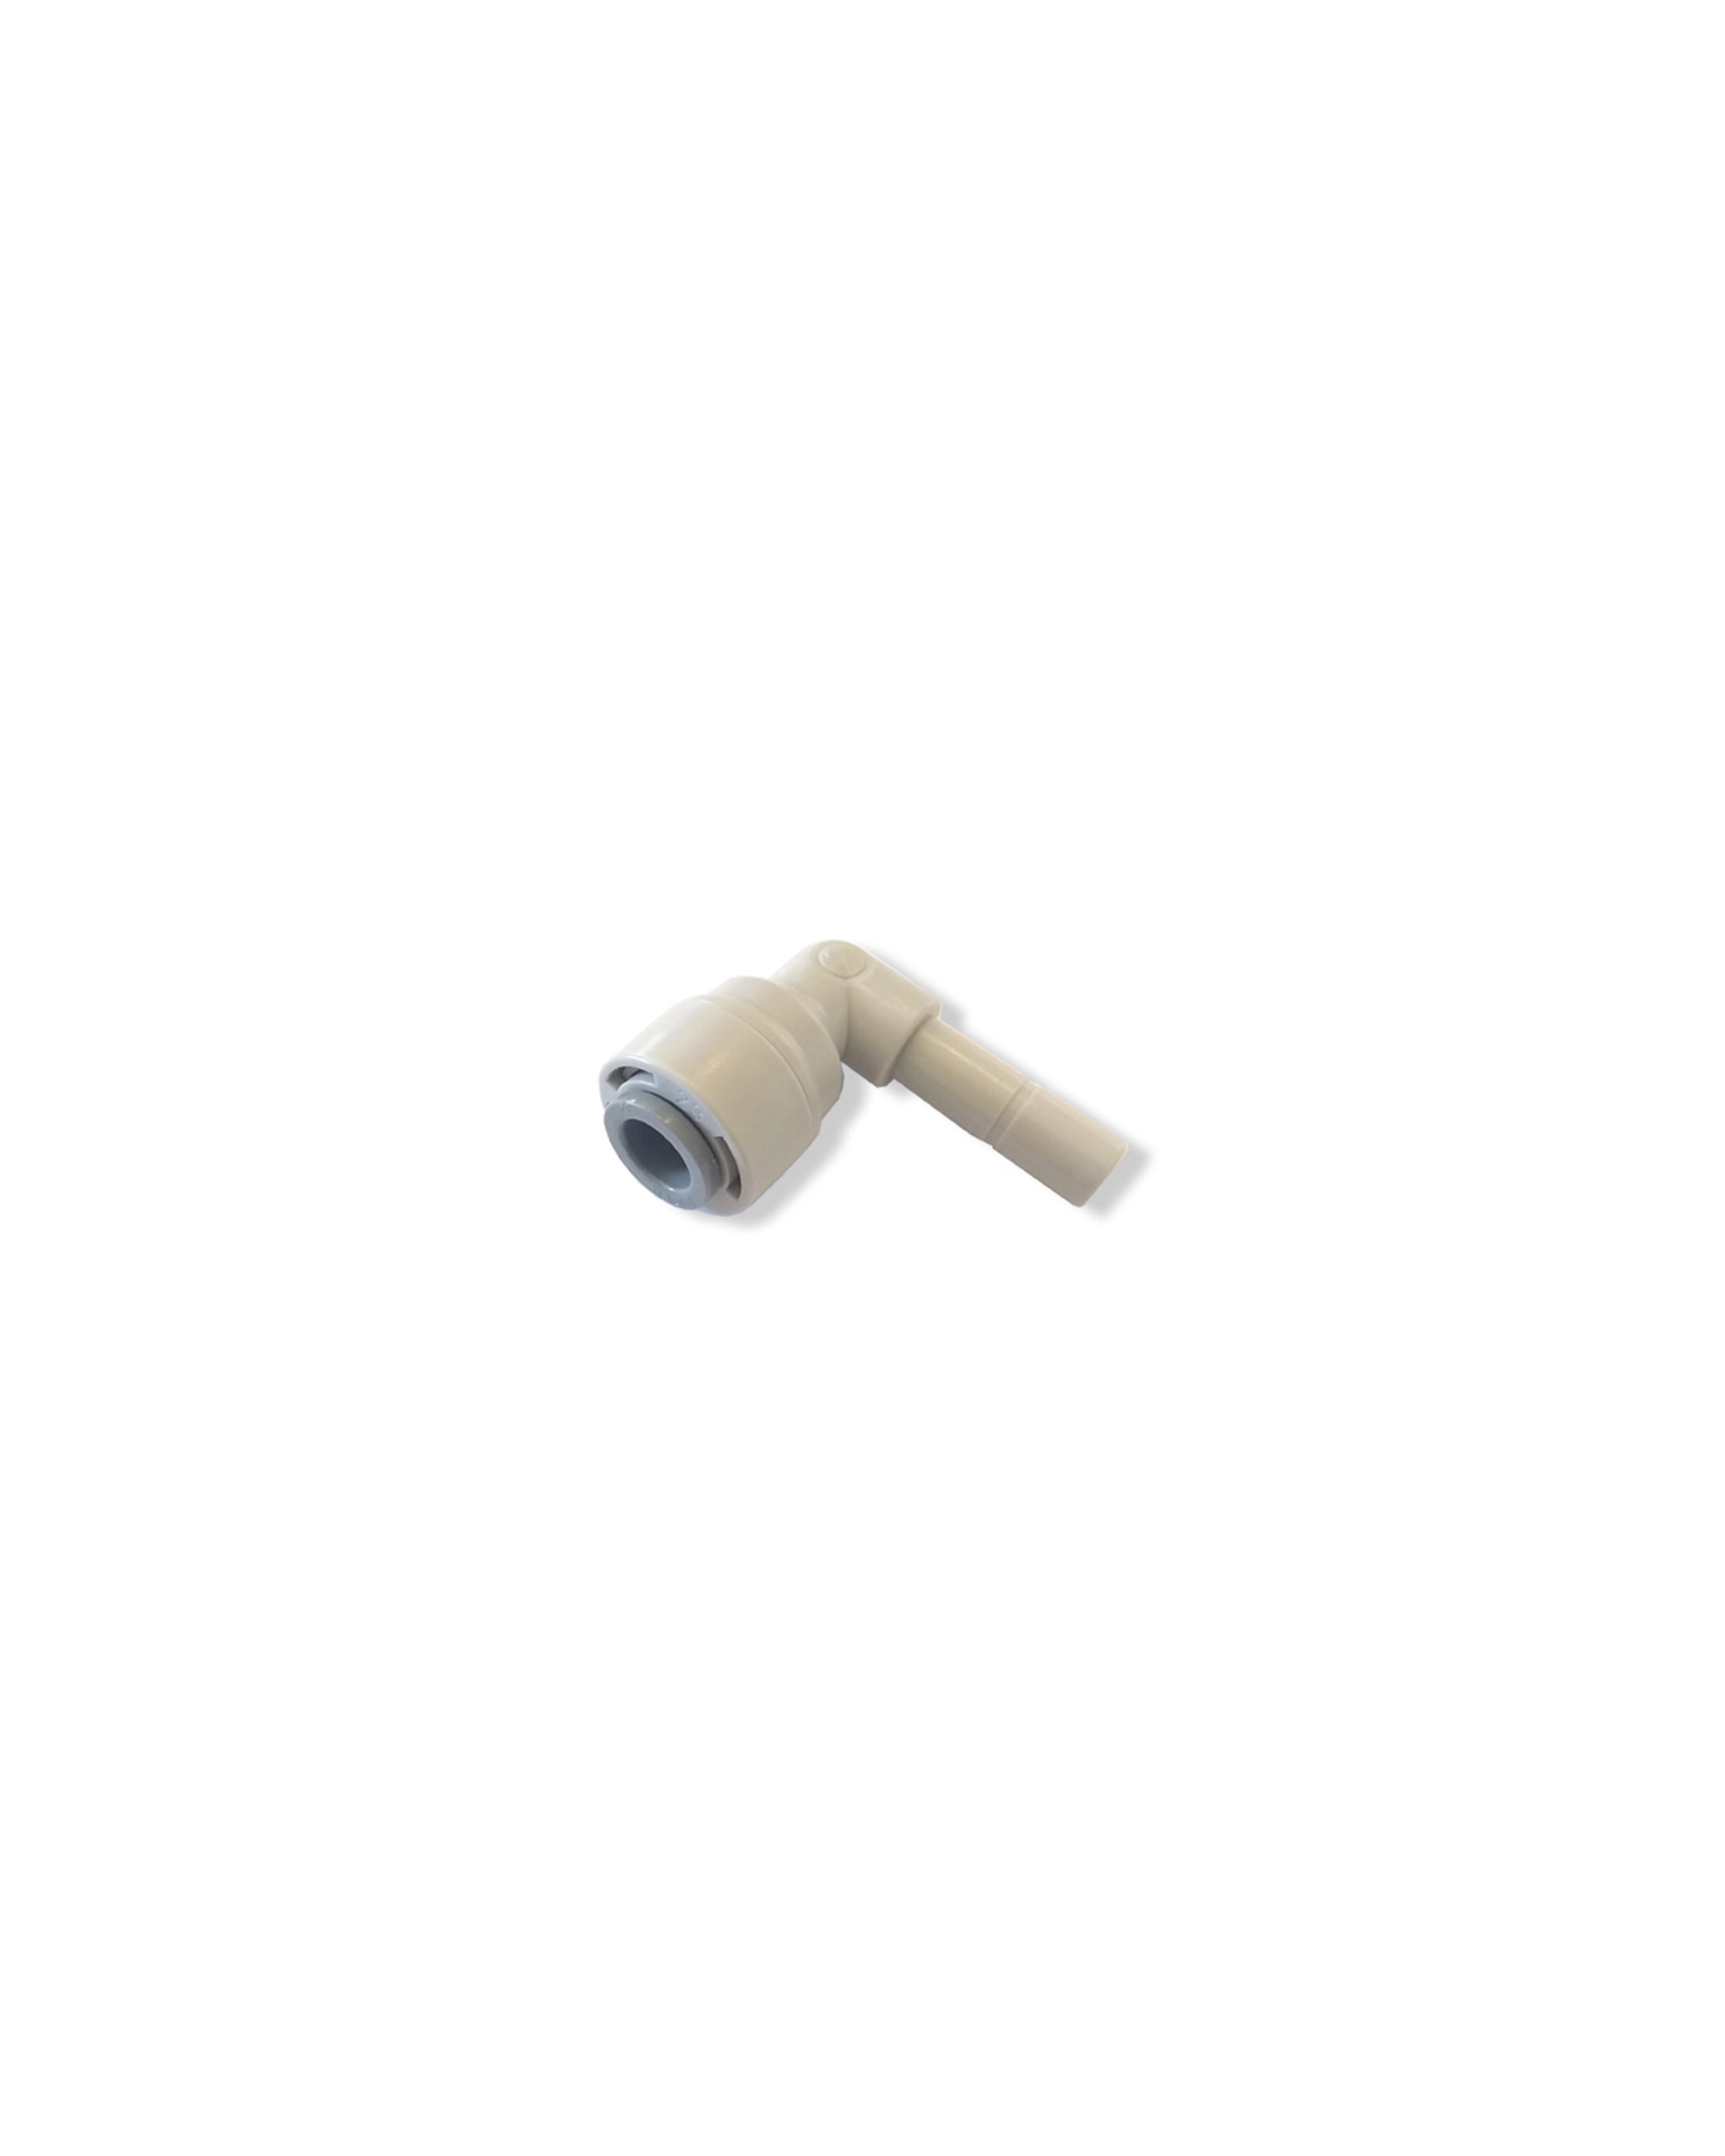 l connector part for portable misting system